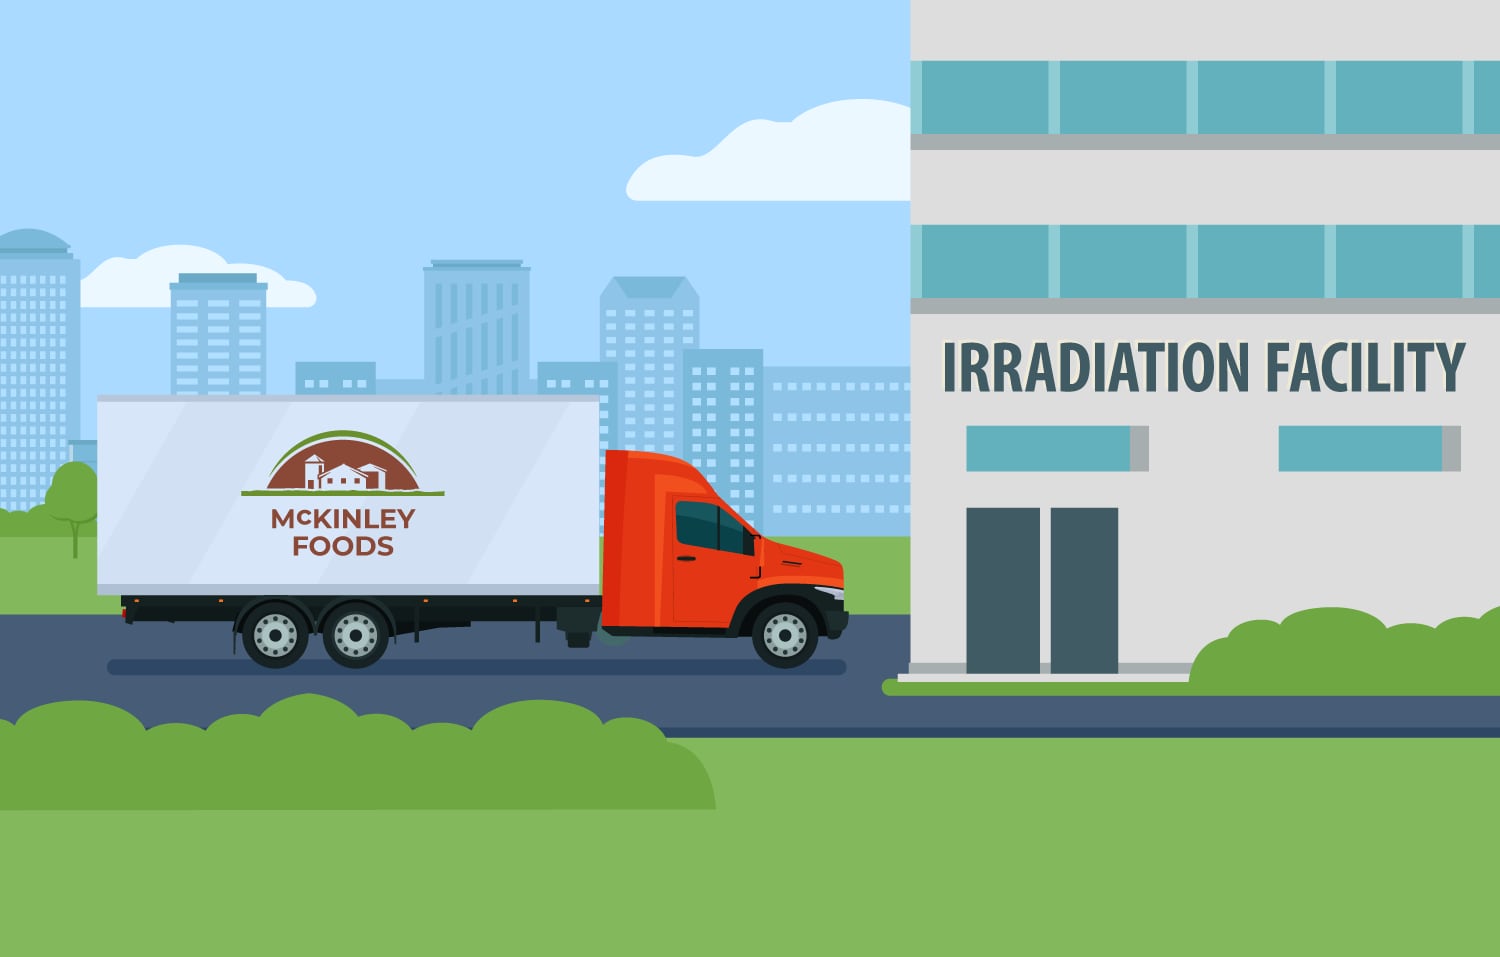 A truck is arriving at an irradiation facility with foods ready to be irradiated.